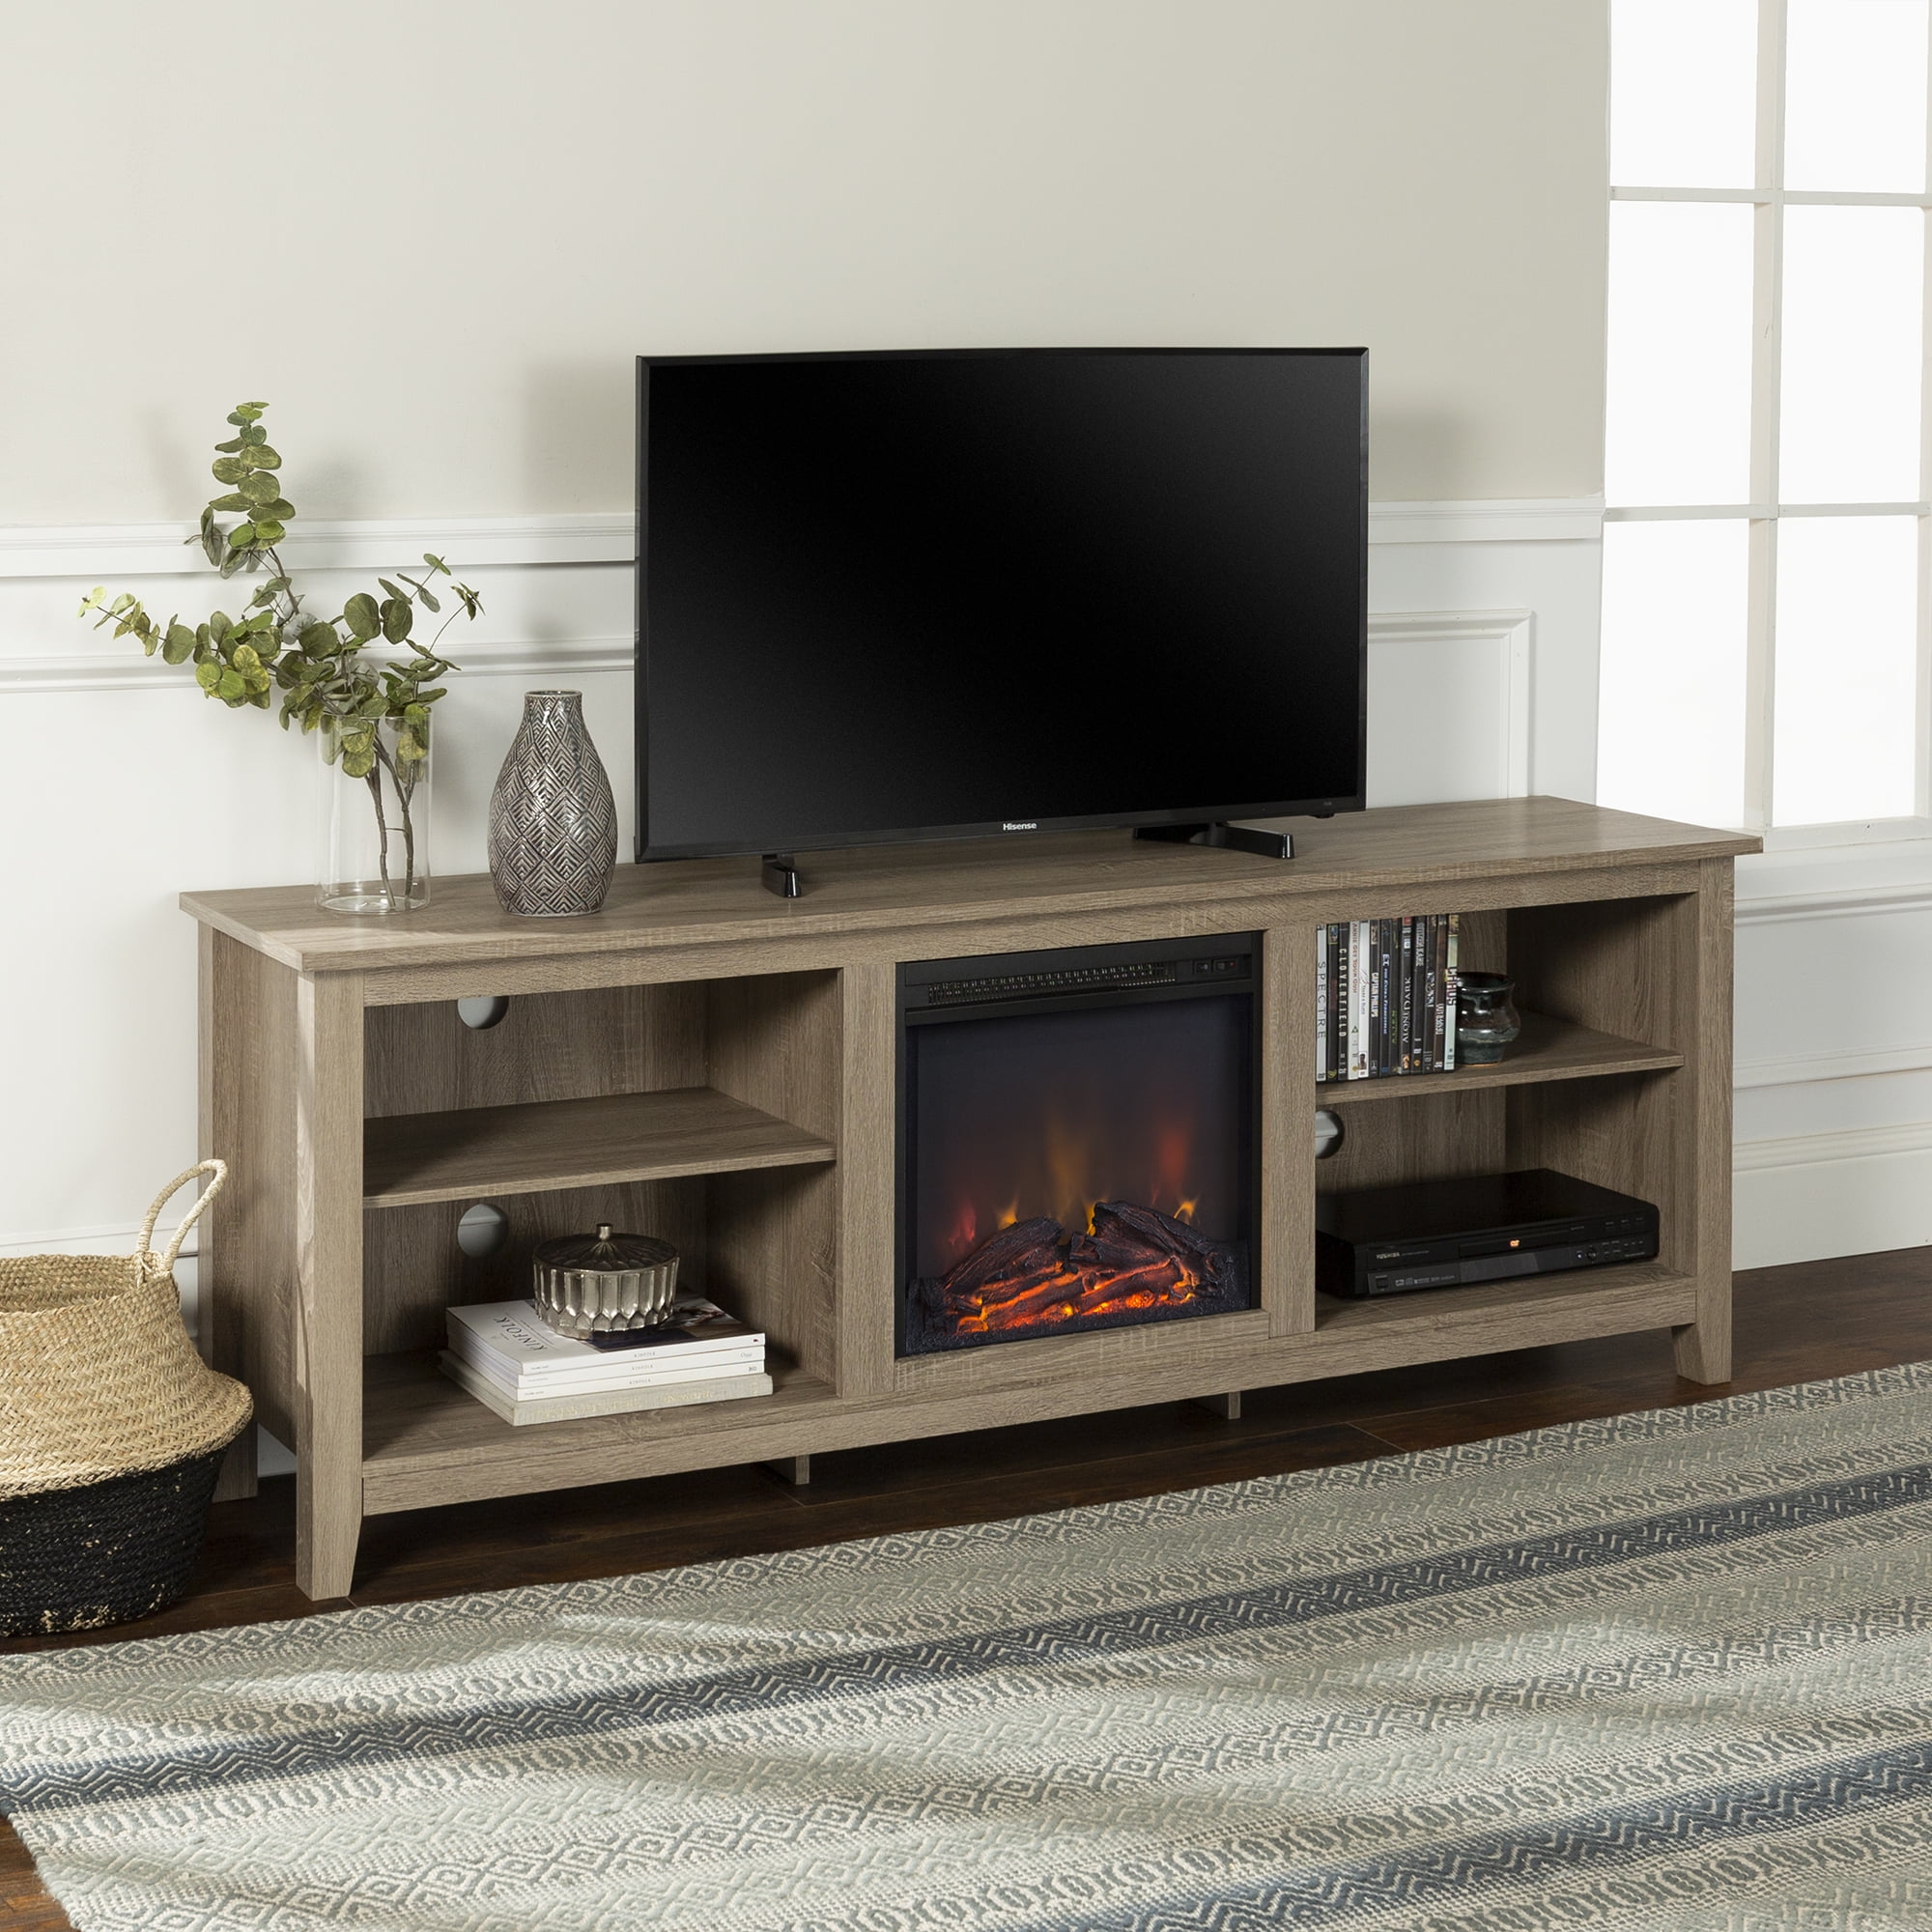 Details about   Electric Fireplace TV Stand Media Storage Television Console Shelves for 58" TVs